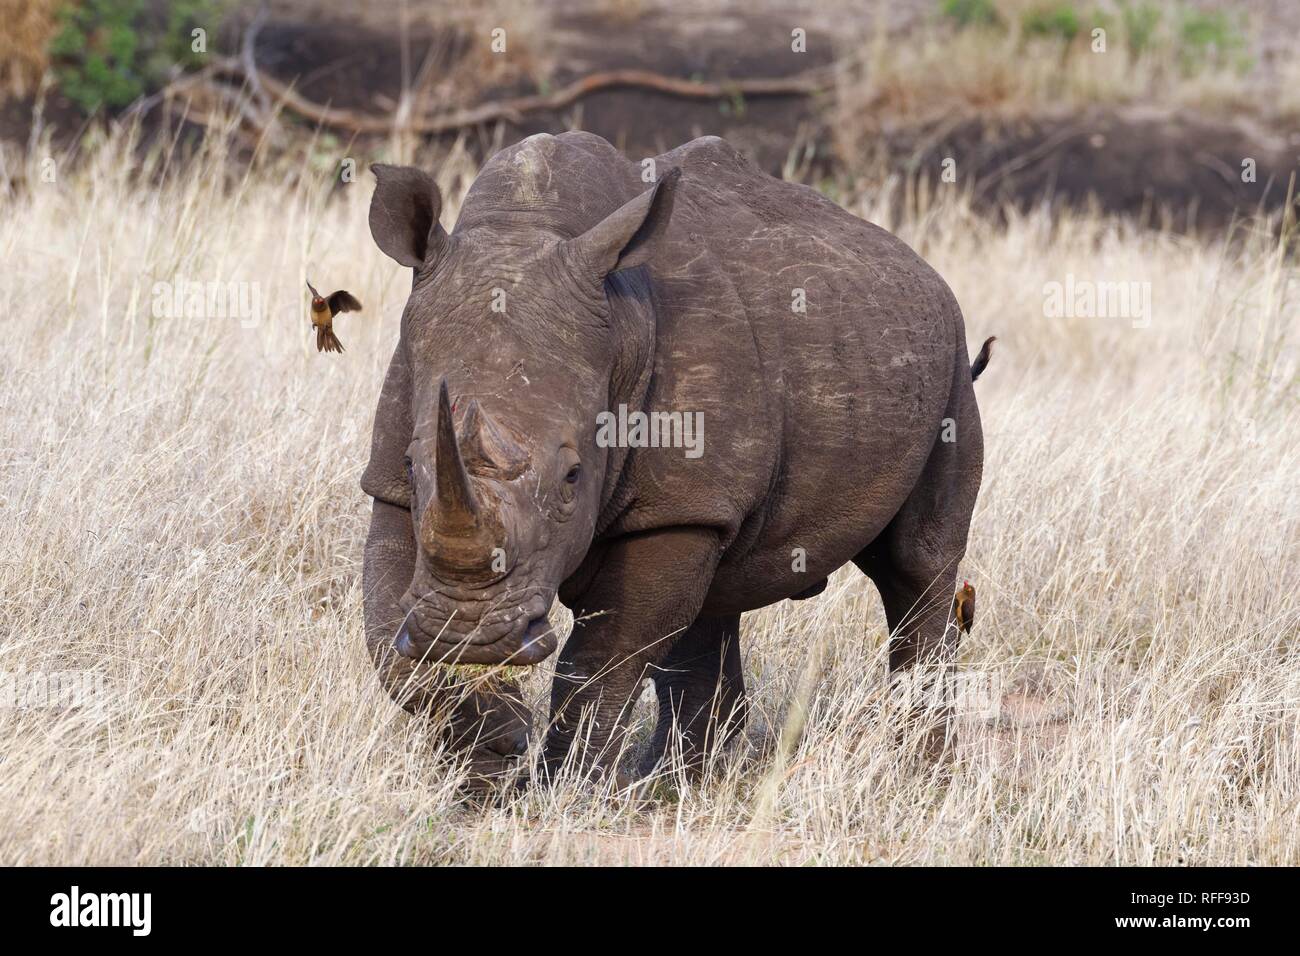 White rhinoceros (Ceratotherium simum), walking adult male, feeding on dry grass, with two red-billed oxpeckers (Buphagus Stock Photo